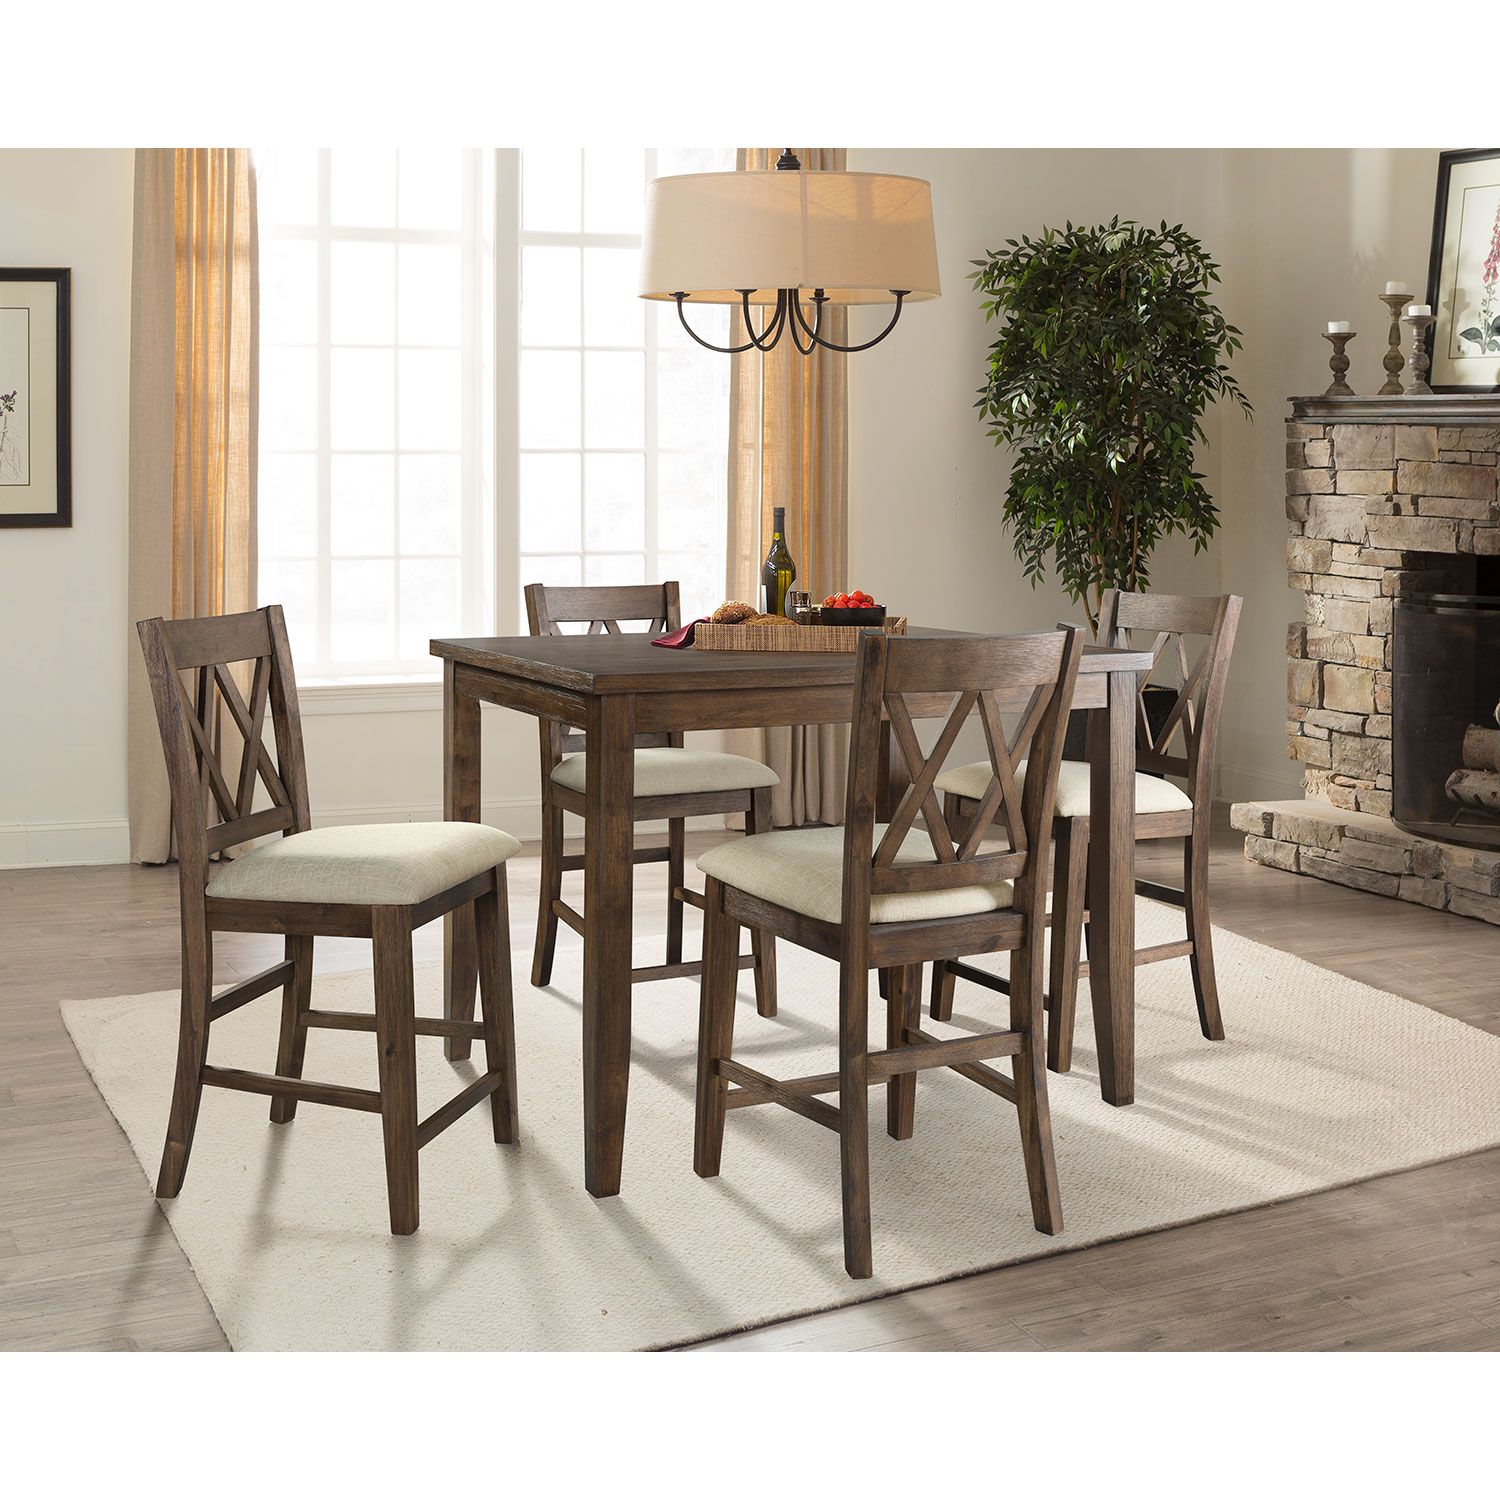 Oliver 5-Piece Counter-Height Dining Set